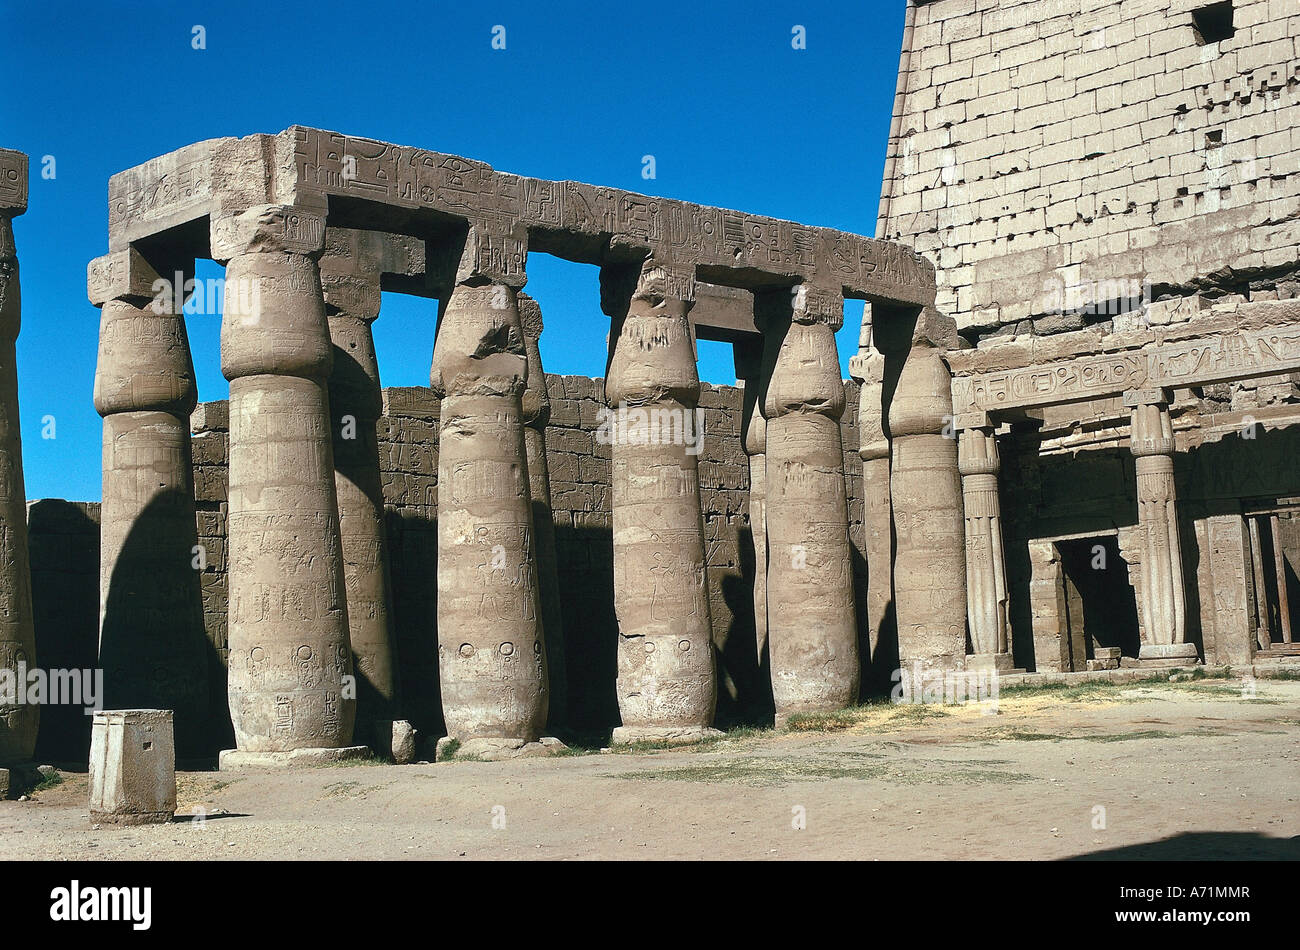 geography / travel, Egypt, Luxor, temple of Amun-Ra, court of King Ramesses, Ramses II., (reigned approx. 1290 - 1224 BC, 19th dynasty), columns, part of complex of god Amon-Re in capital Thebes, column, papyrus, new empire, antiquity, religion, column court, architecture, historical, historic, ancient, pharaoh Ramesses, Ramses the great, inner courtyard, Amun Ra, nineteenth, Amon re, , Stock Photo